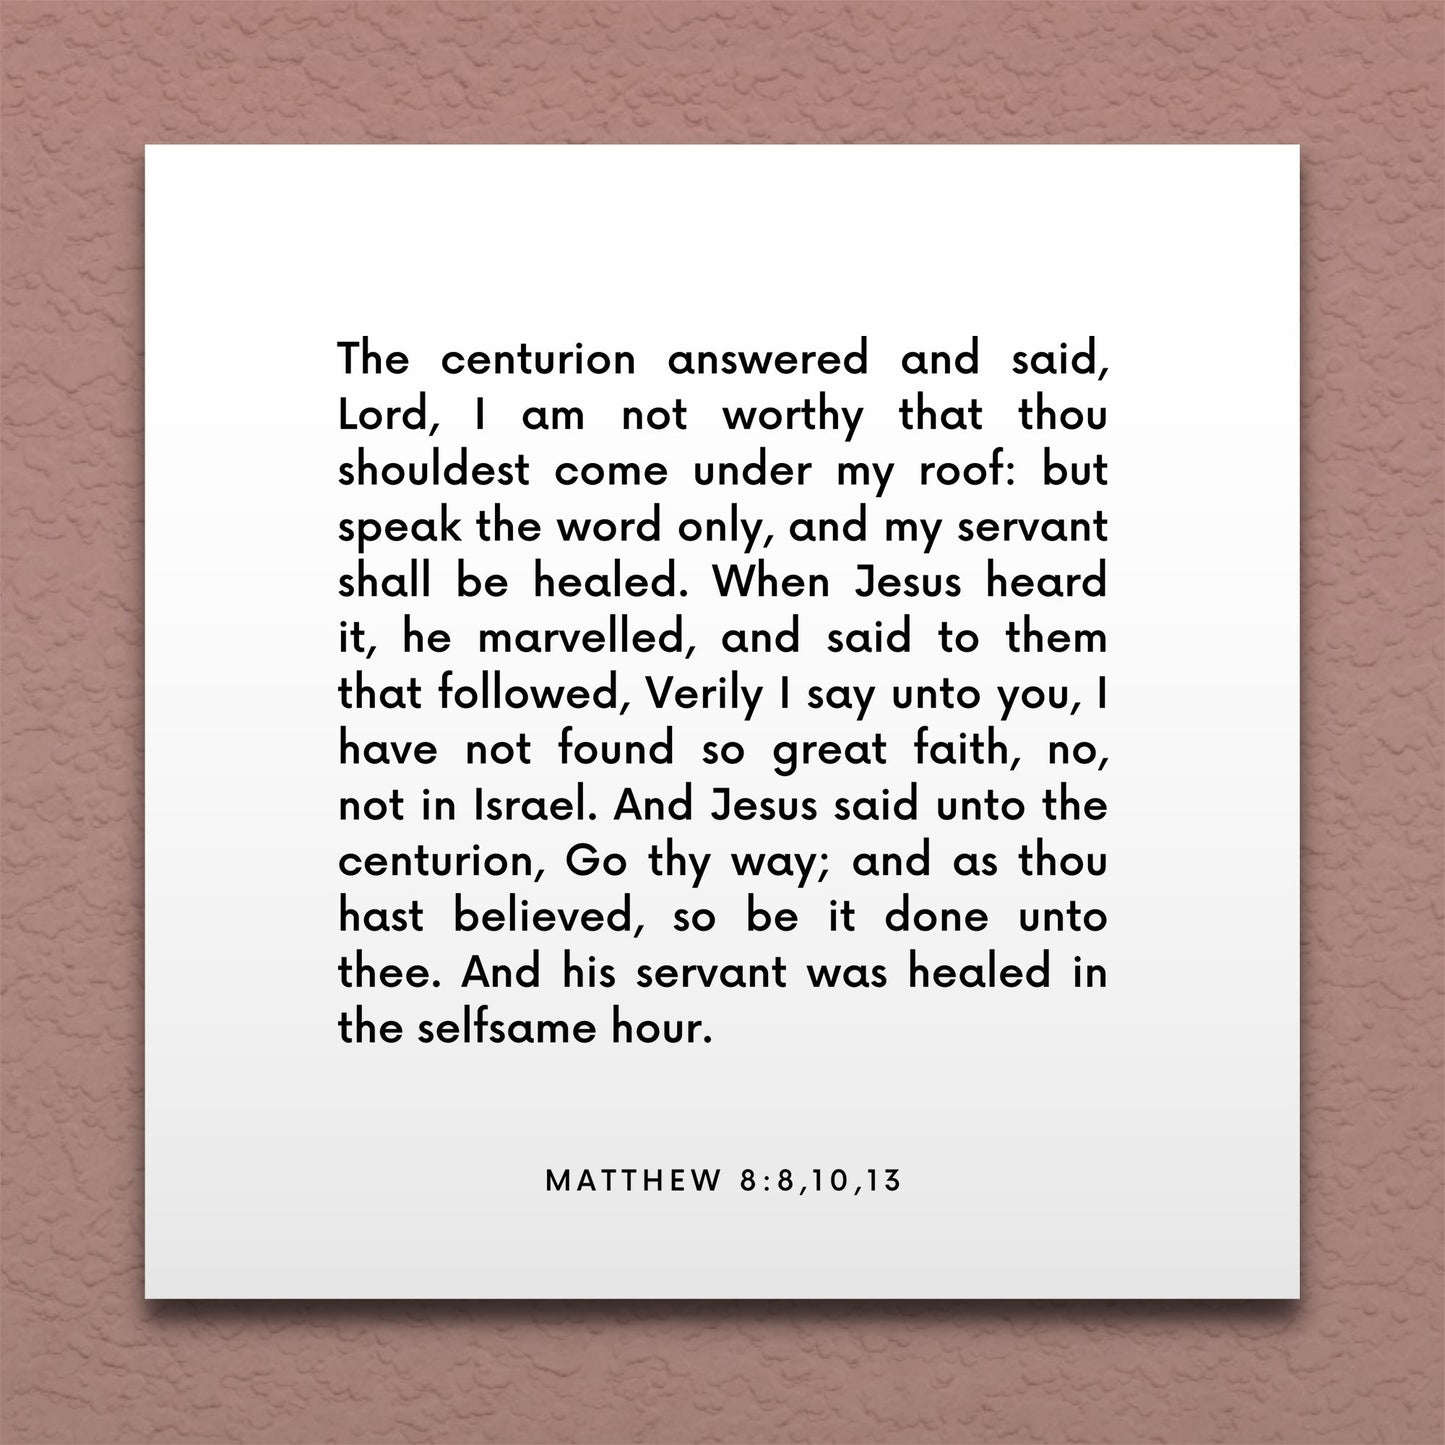 Wall-mounted scripture tile for Matthew 8:8,10,13 - "I have not found so great faith, no, not in Israel"